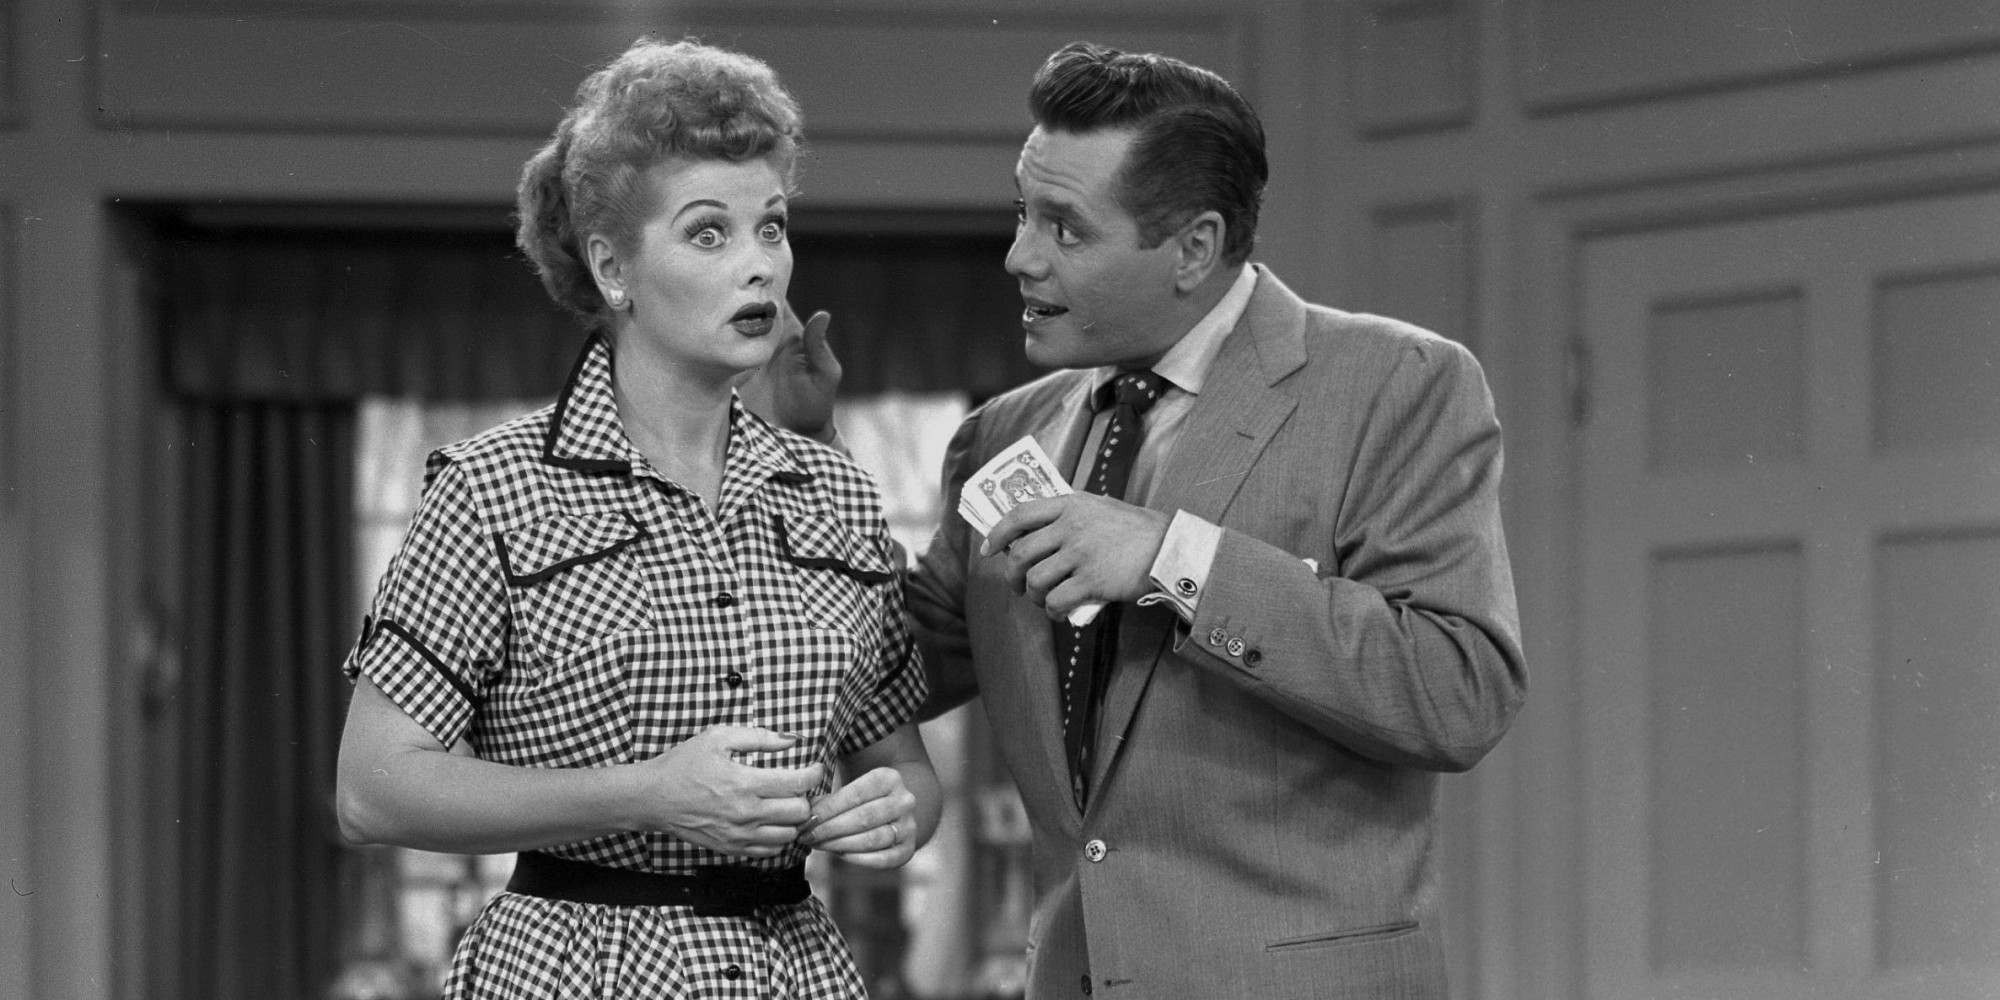 You got 15 out of 20! Can You Name These 1950s TV Shows? (Easy Level)